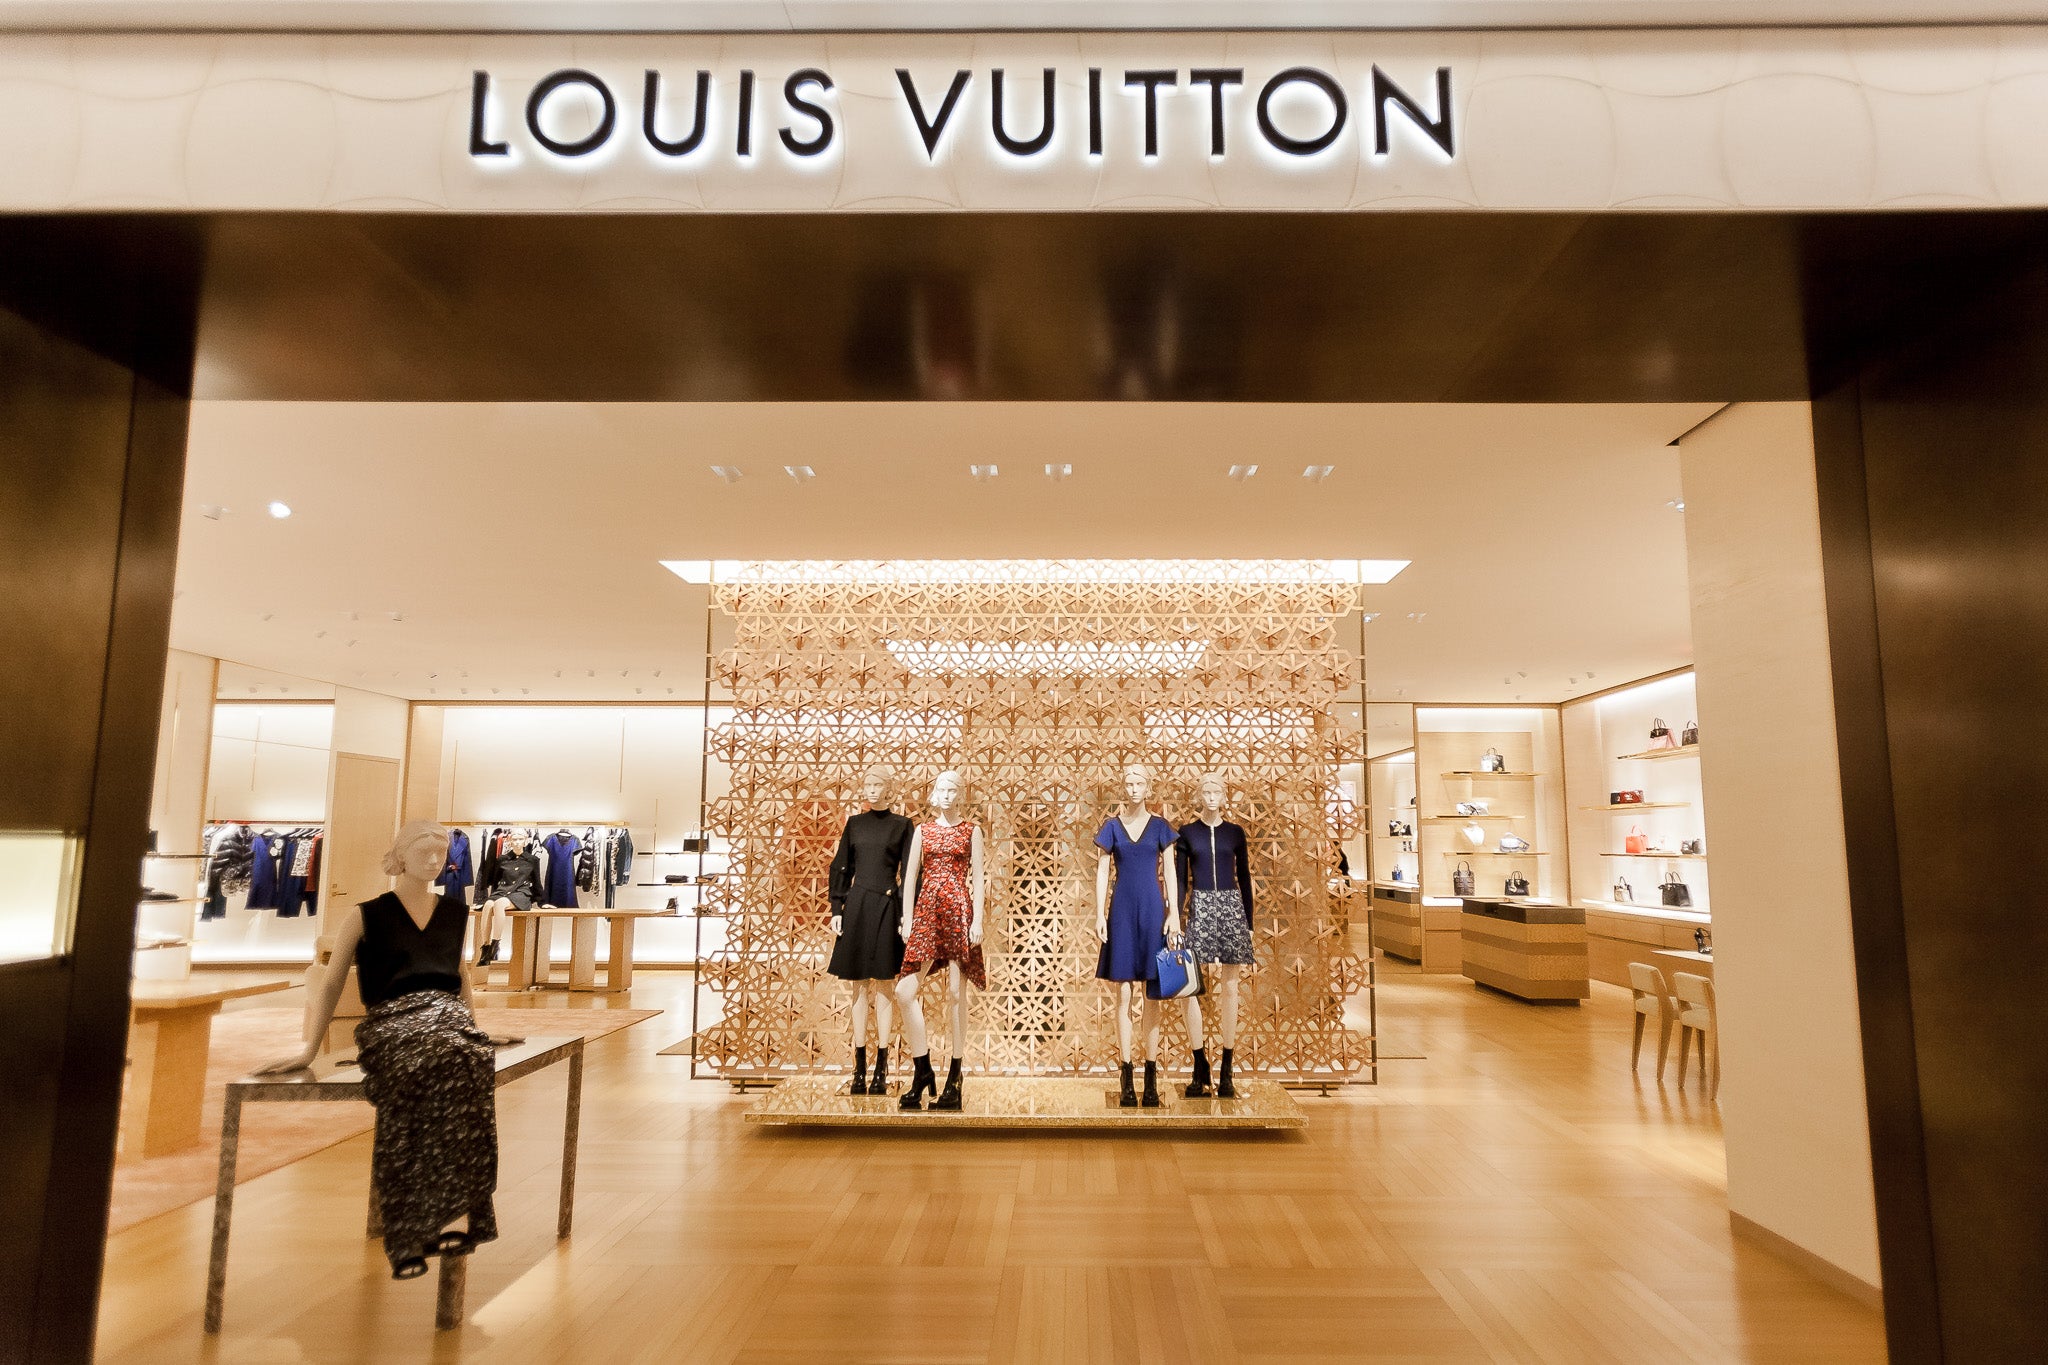 Louis Vuitton is the most searched-for brand in the UAE and the